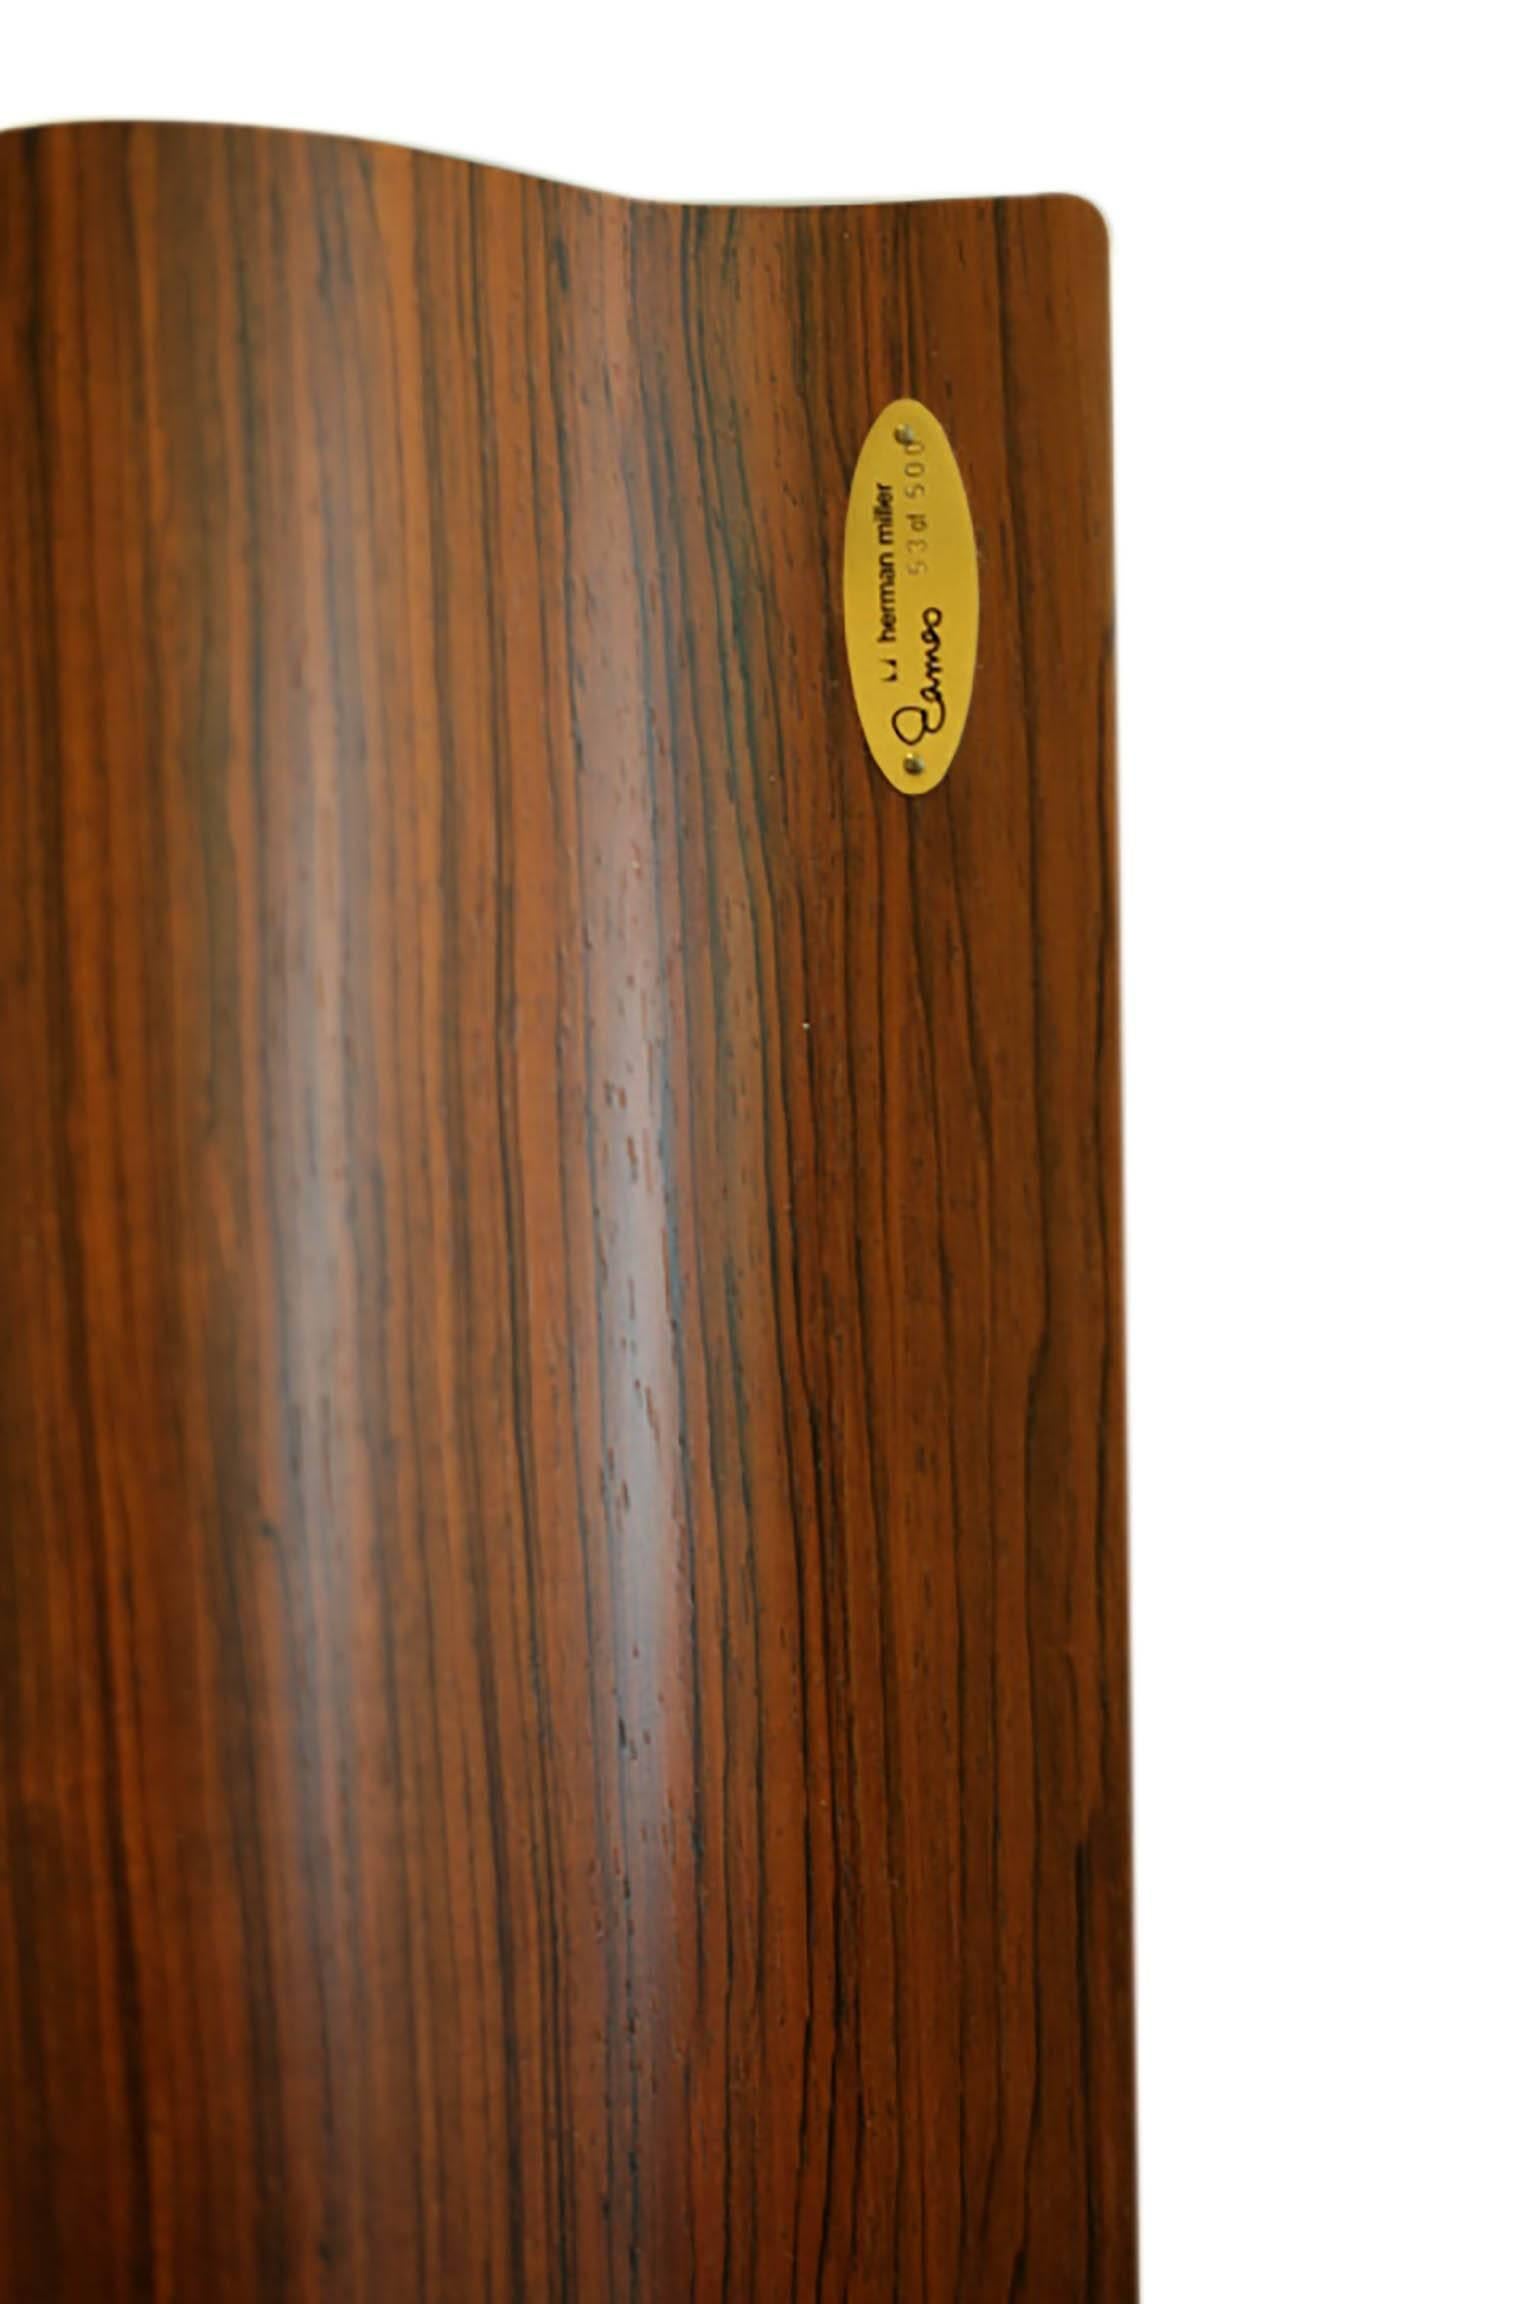 Bentwood six-panel rosewood veneer room divider. Special edition, this is number 53 of 500 that Herman Miller produced in 1992 when a buried stockpile of old growth Brazilian rosewood was discovered at the Herman Miller manufacturing plant. Signed